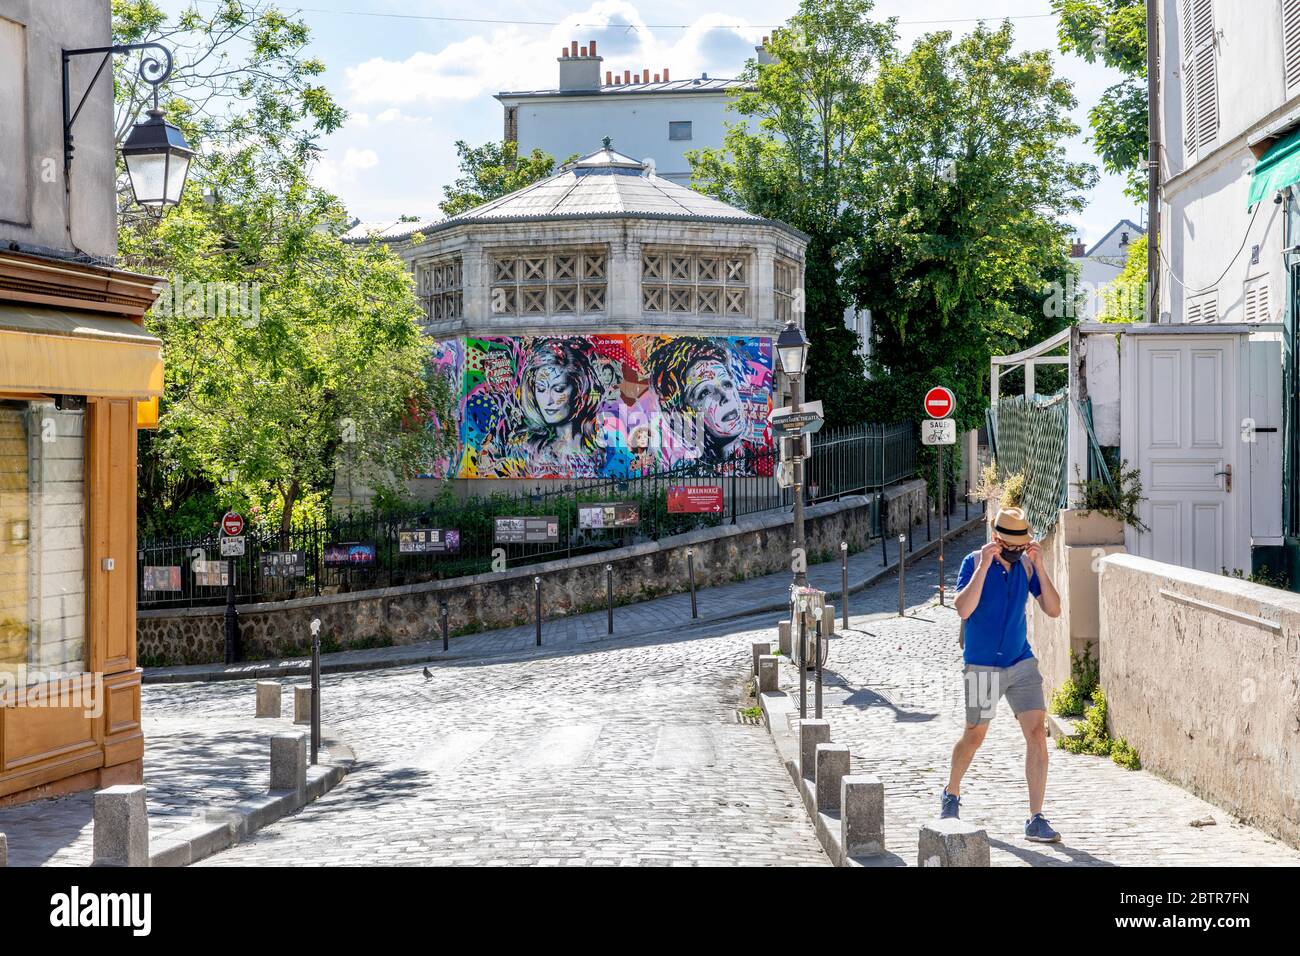 Paris, France - May 20, 2020: Typical street in Montmartre neighborhood in Paris during lockdown because of covid-19 Stock Photo